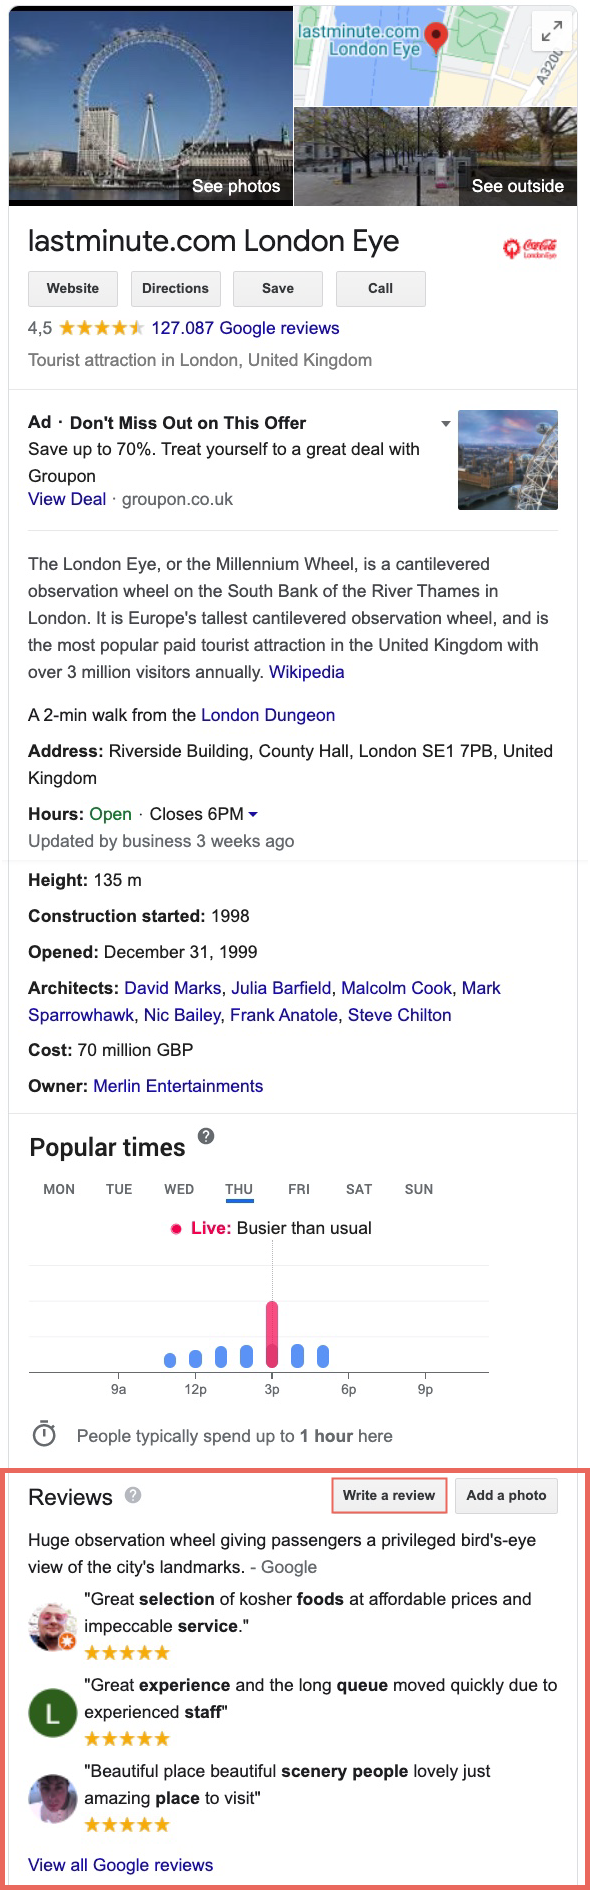 You can see the Google My Business profile of London Eyes. In addition to general information about the address, opening hours, route, website, etc., you will also find the reviews that have already been submitted. Click the "Write review" button in the company's info field to open the window where you can enter your review. You can also view all Google reviews that have already been submitted.